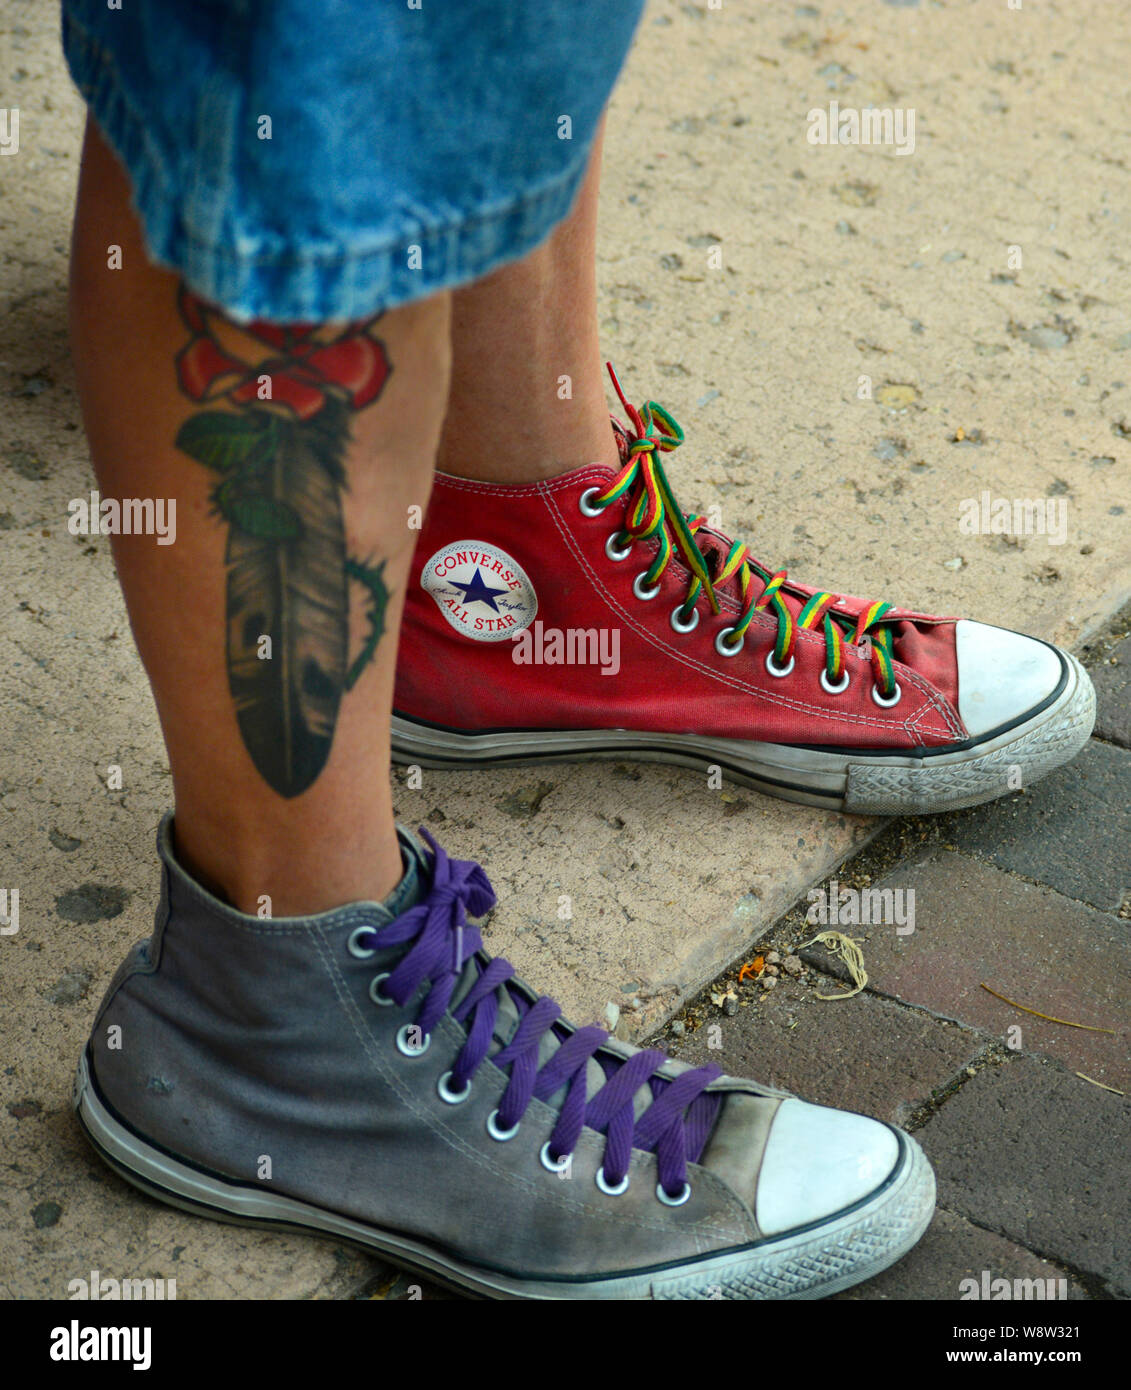 Young man wears mismatched Converse brand tennis shoes Stock Photo